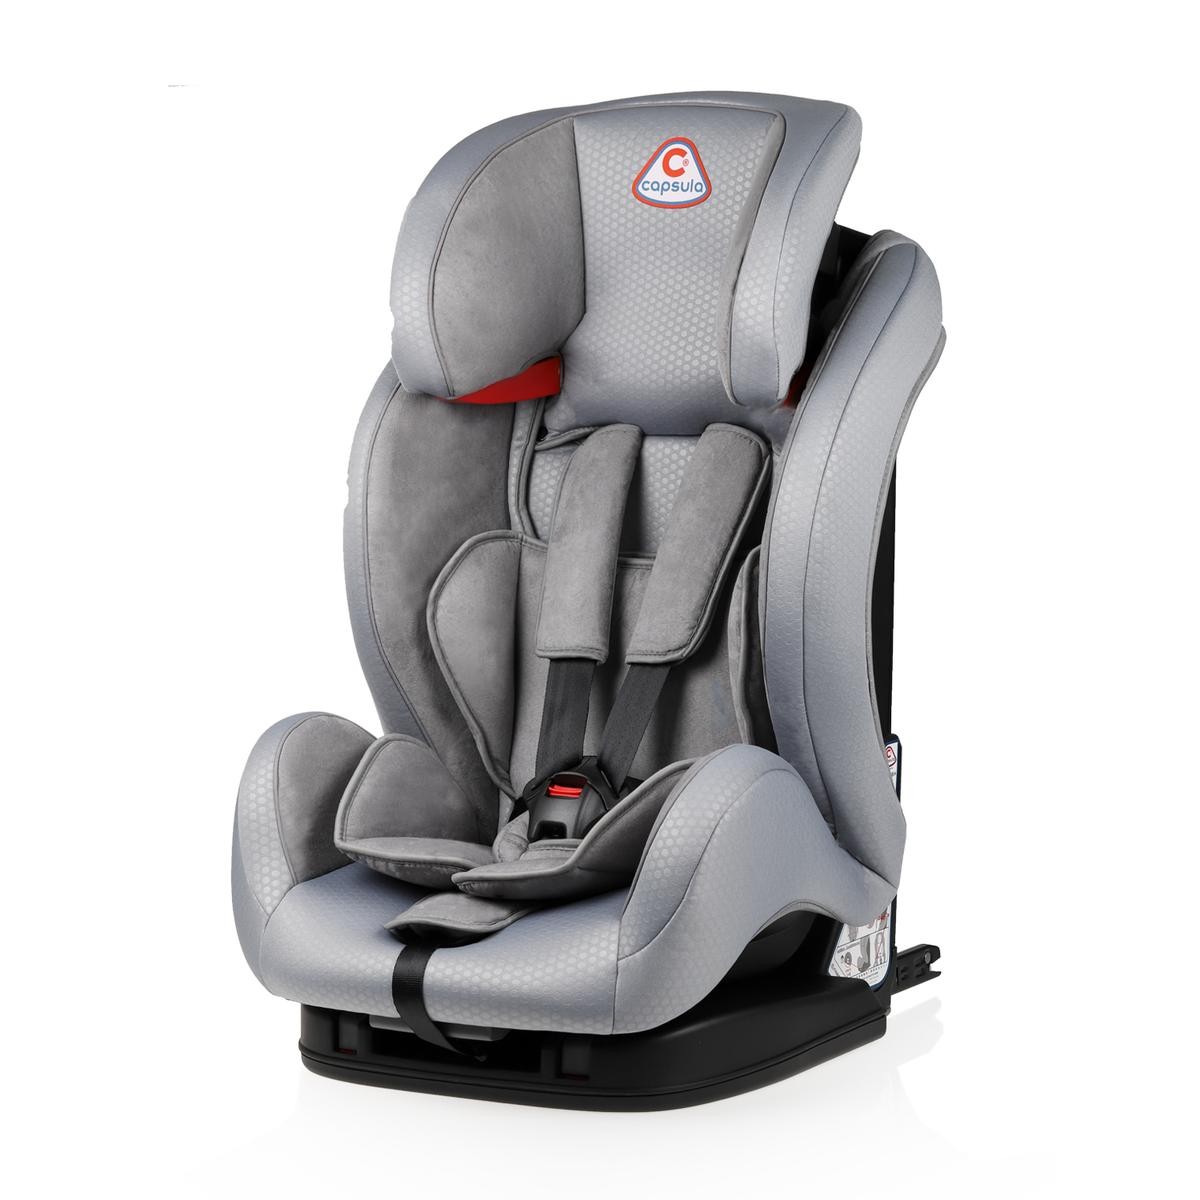 capsula MT6X 771120 Child car seat Child weight: 9-36kg, Child seat harness: 5-point harness